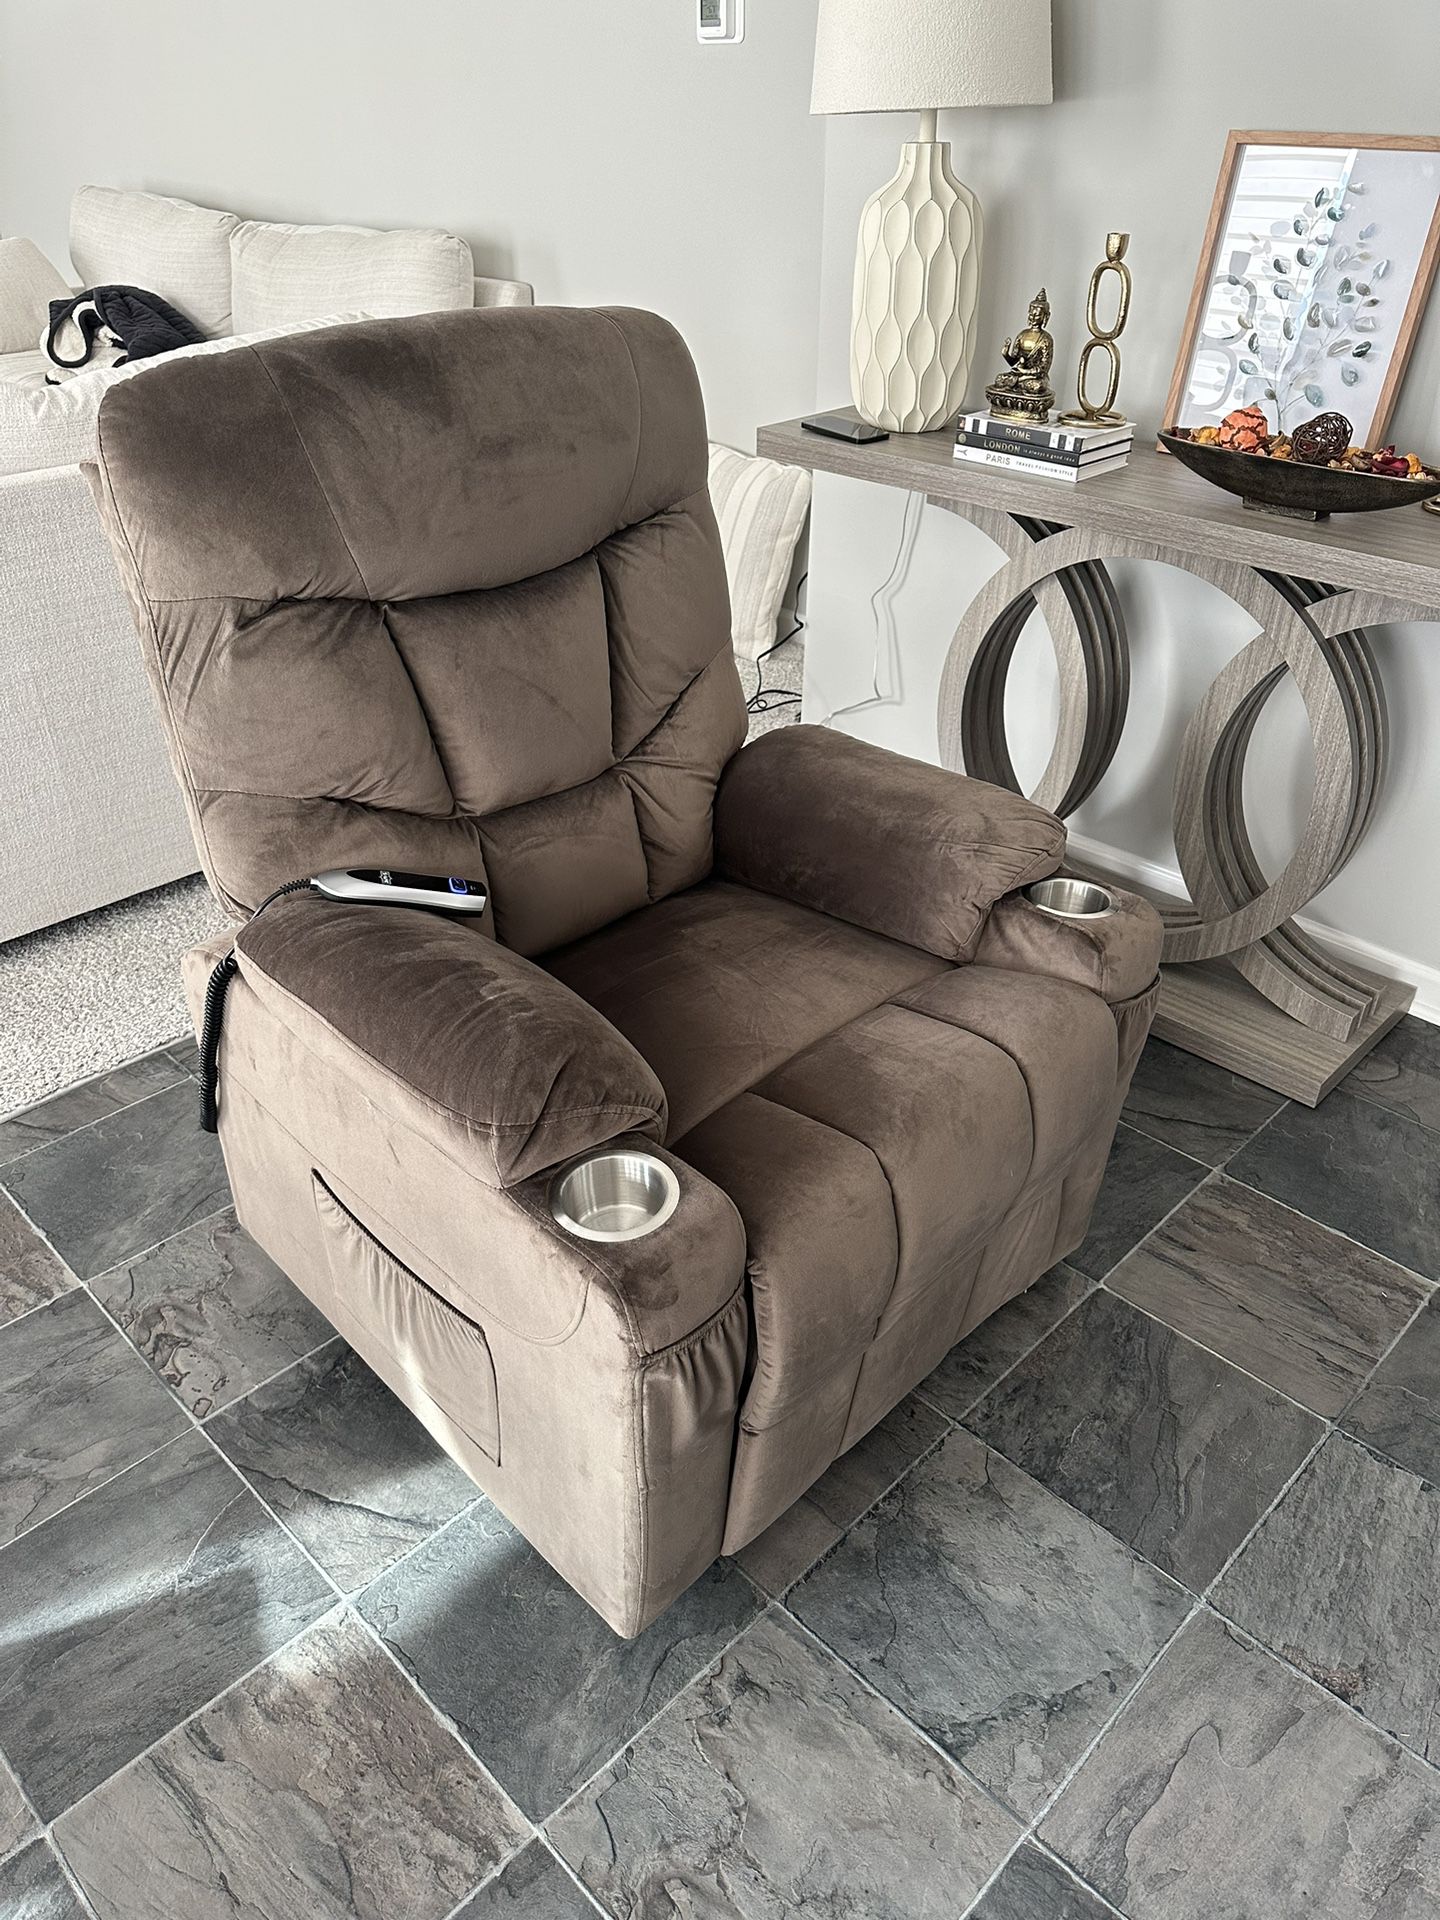 Brand New Power Lift Recliner Chair For Sale